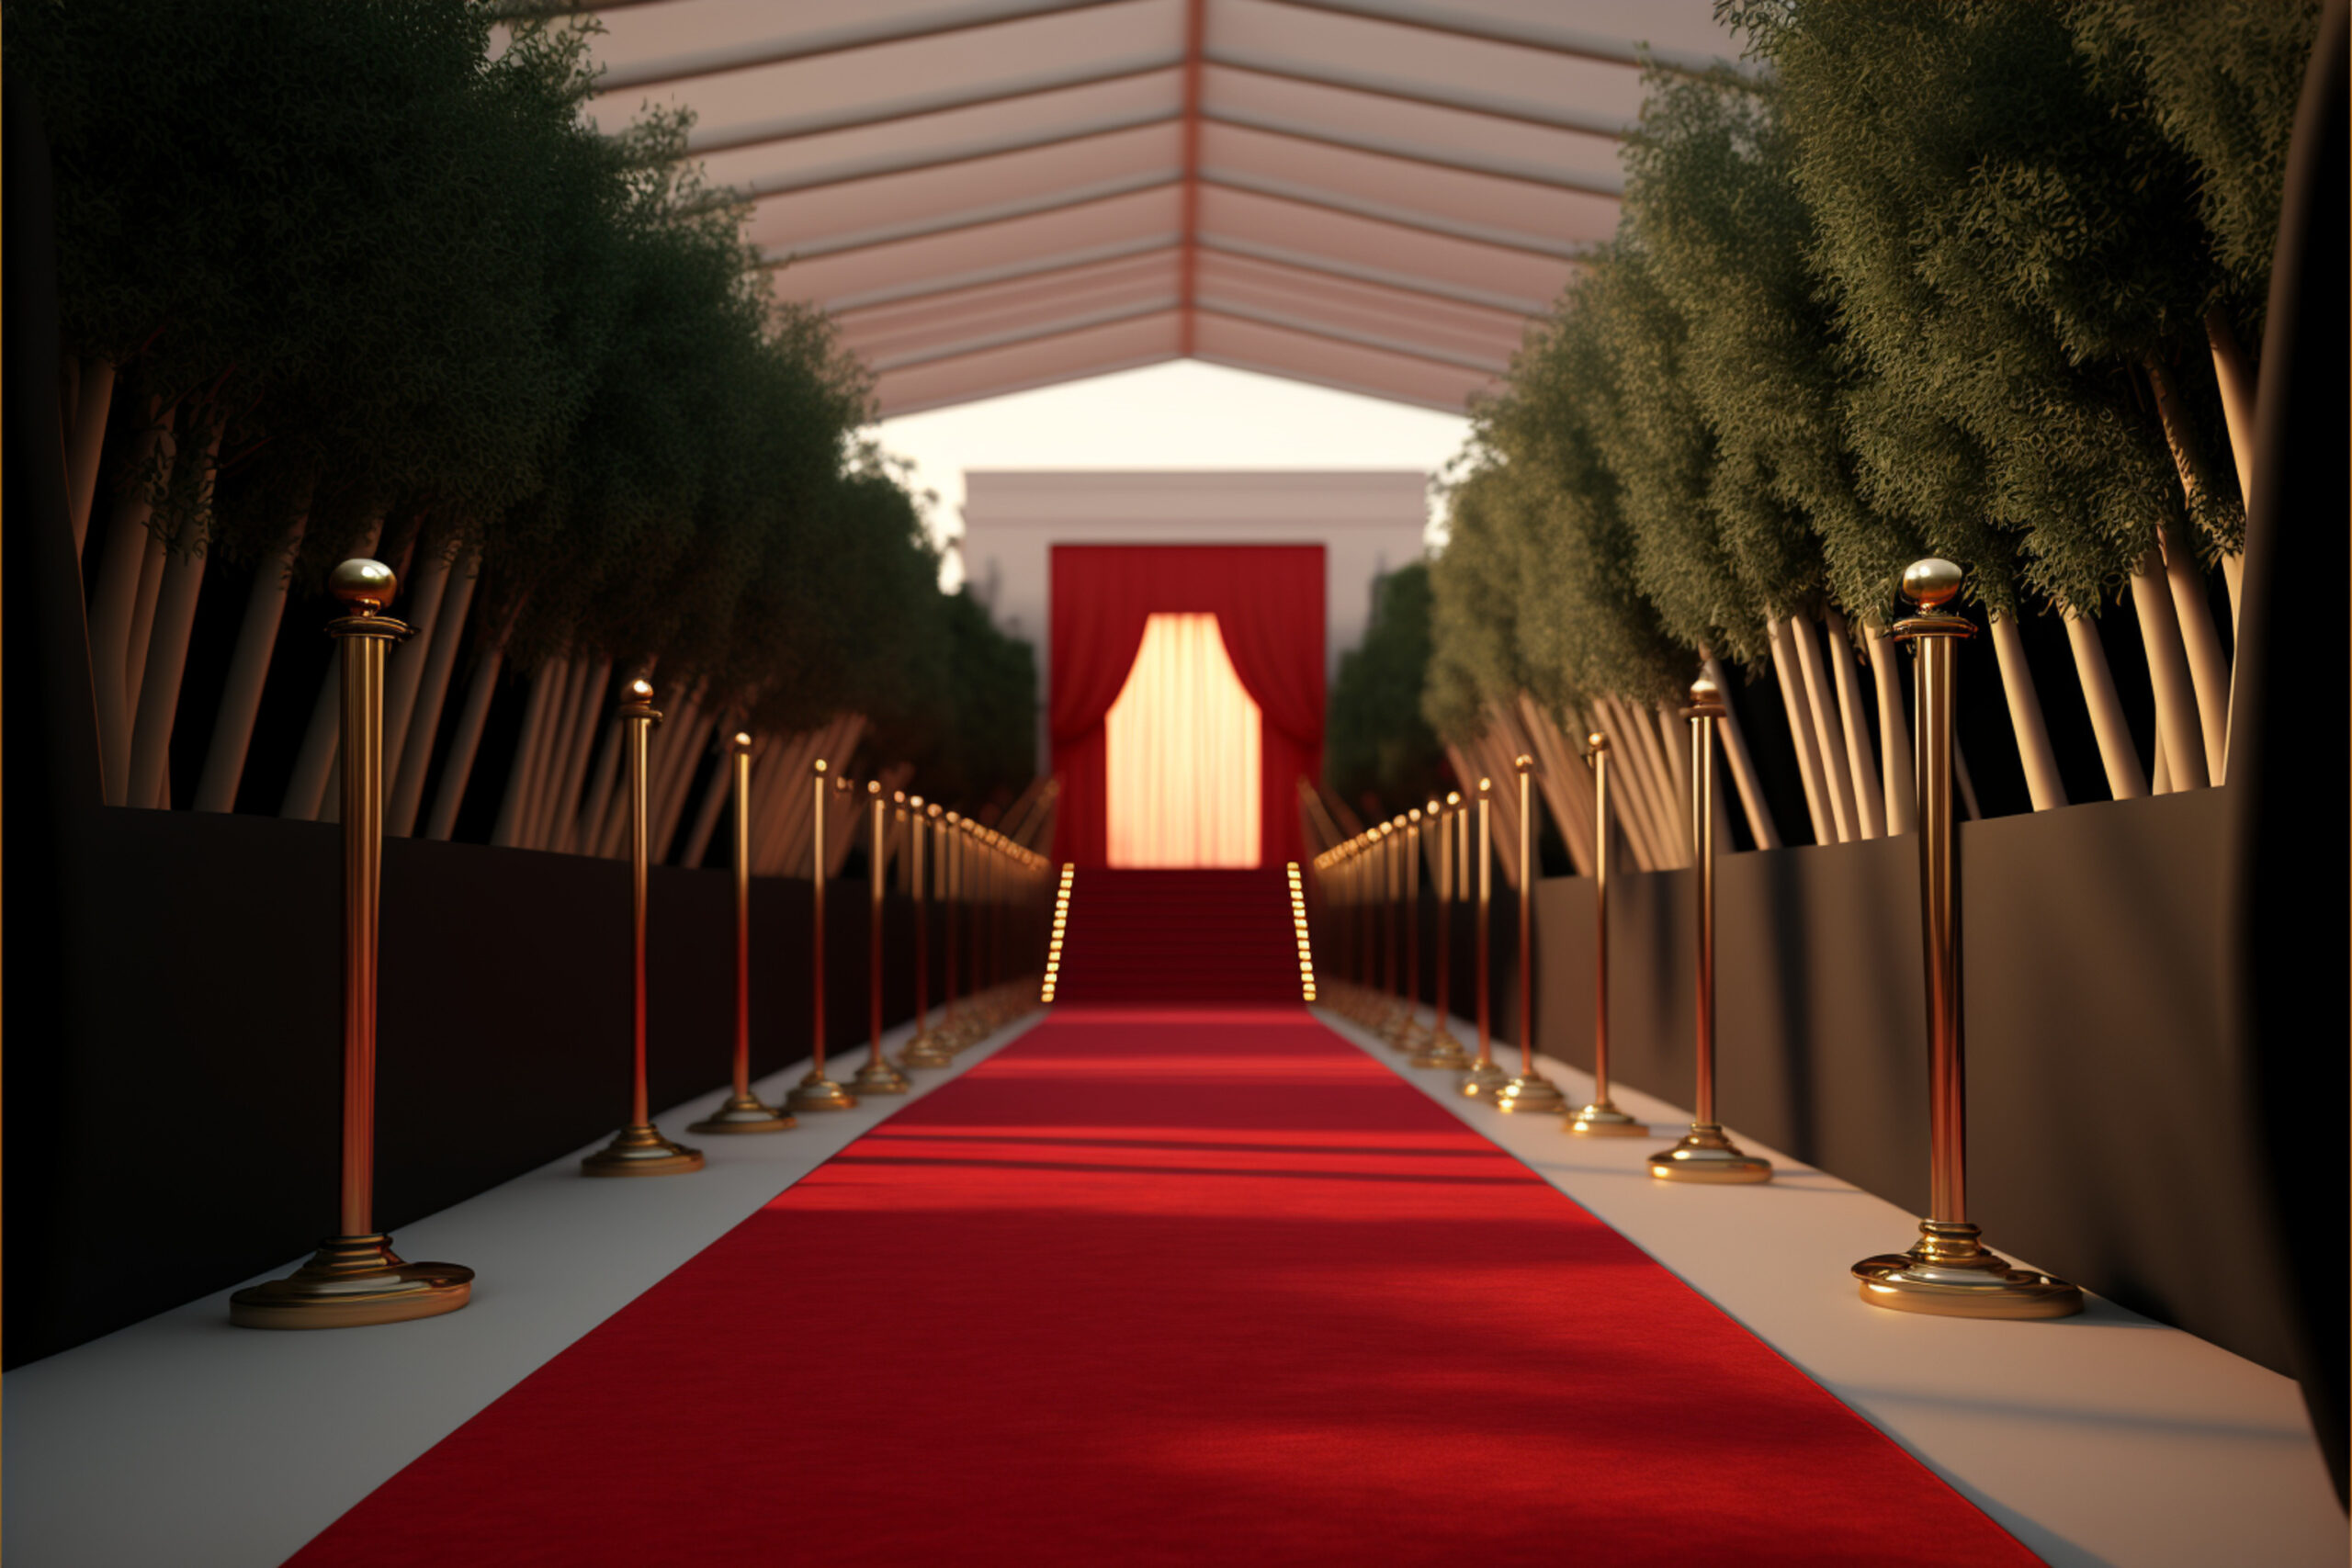 From Hypebeast to Hollywood: It's time the 'The Red Carpet' embraced  branded virtual outfits - New Digital Age